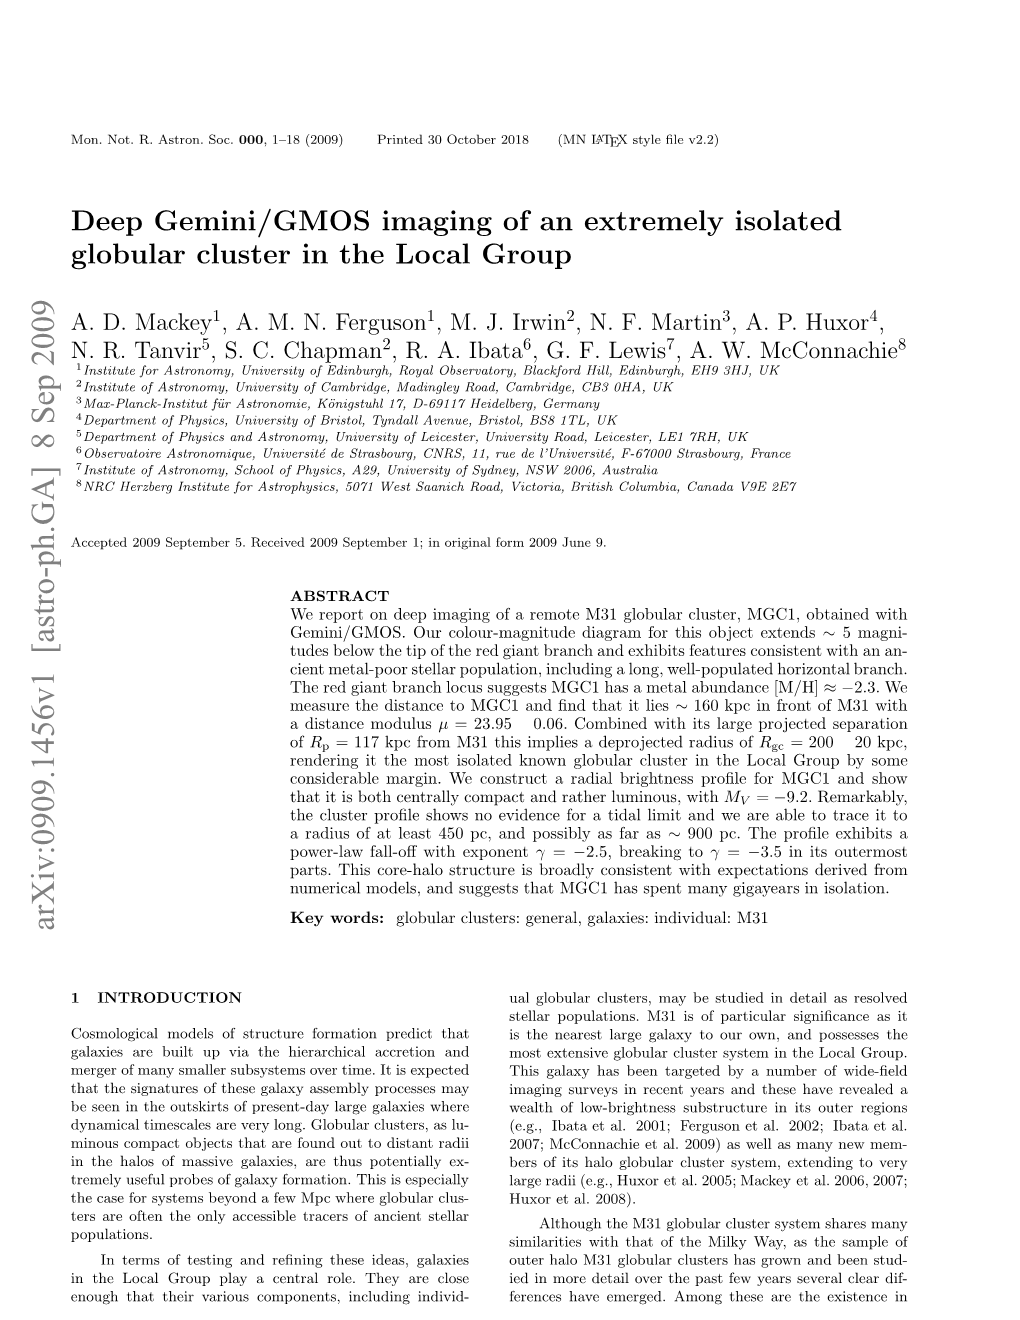 Deep Gemini/GMOS Imaging of an Extremely Isolated Globular Cluster